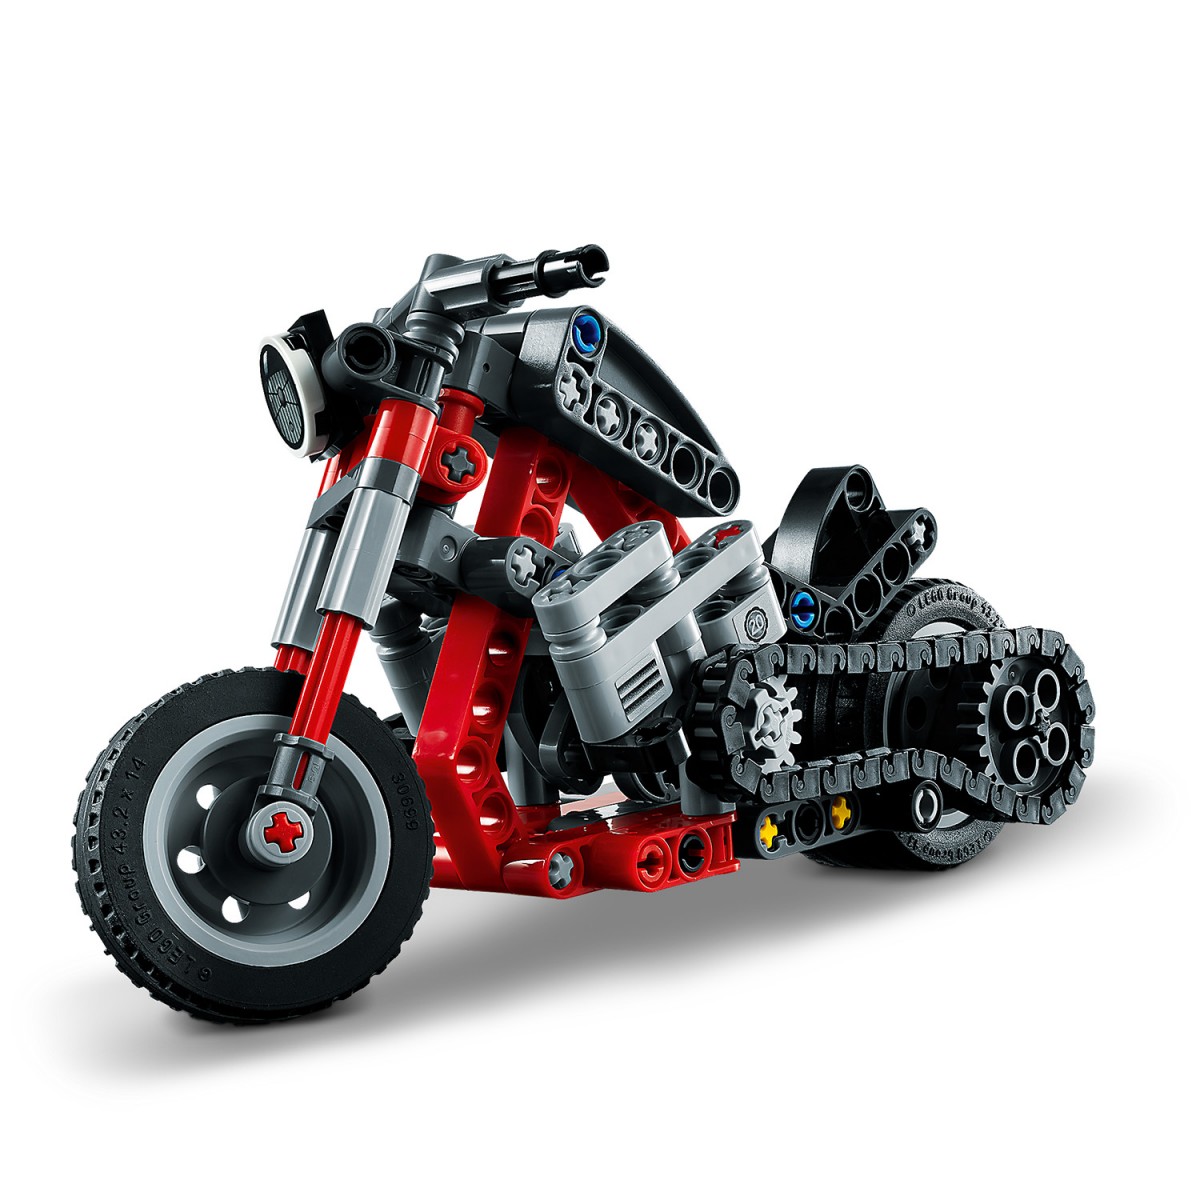 Lego Technic Motorcycle 42132 Model Building Kit (163 Pieces)